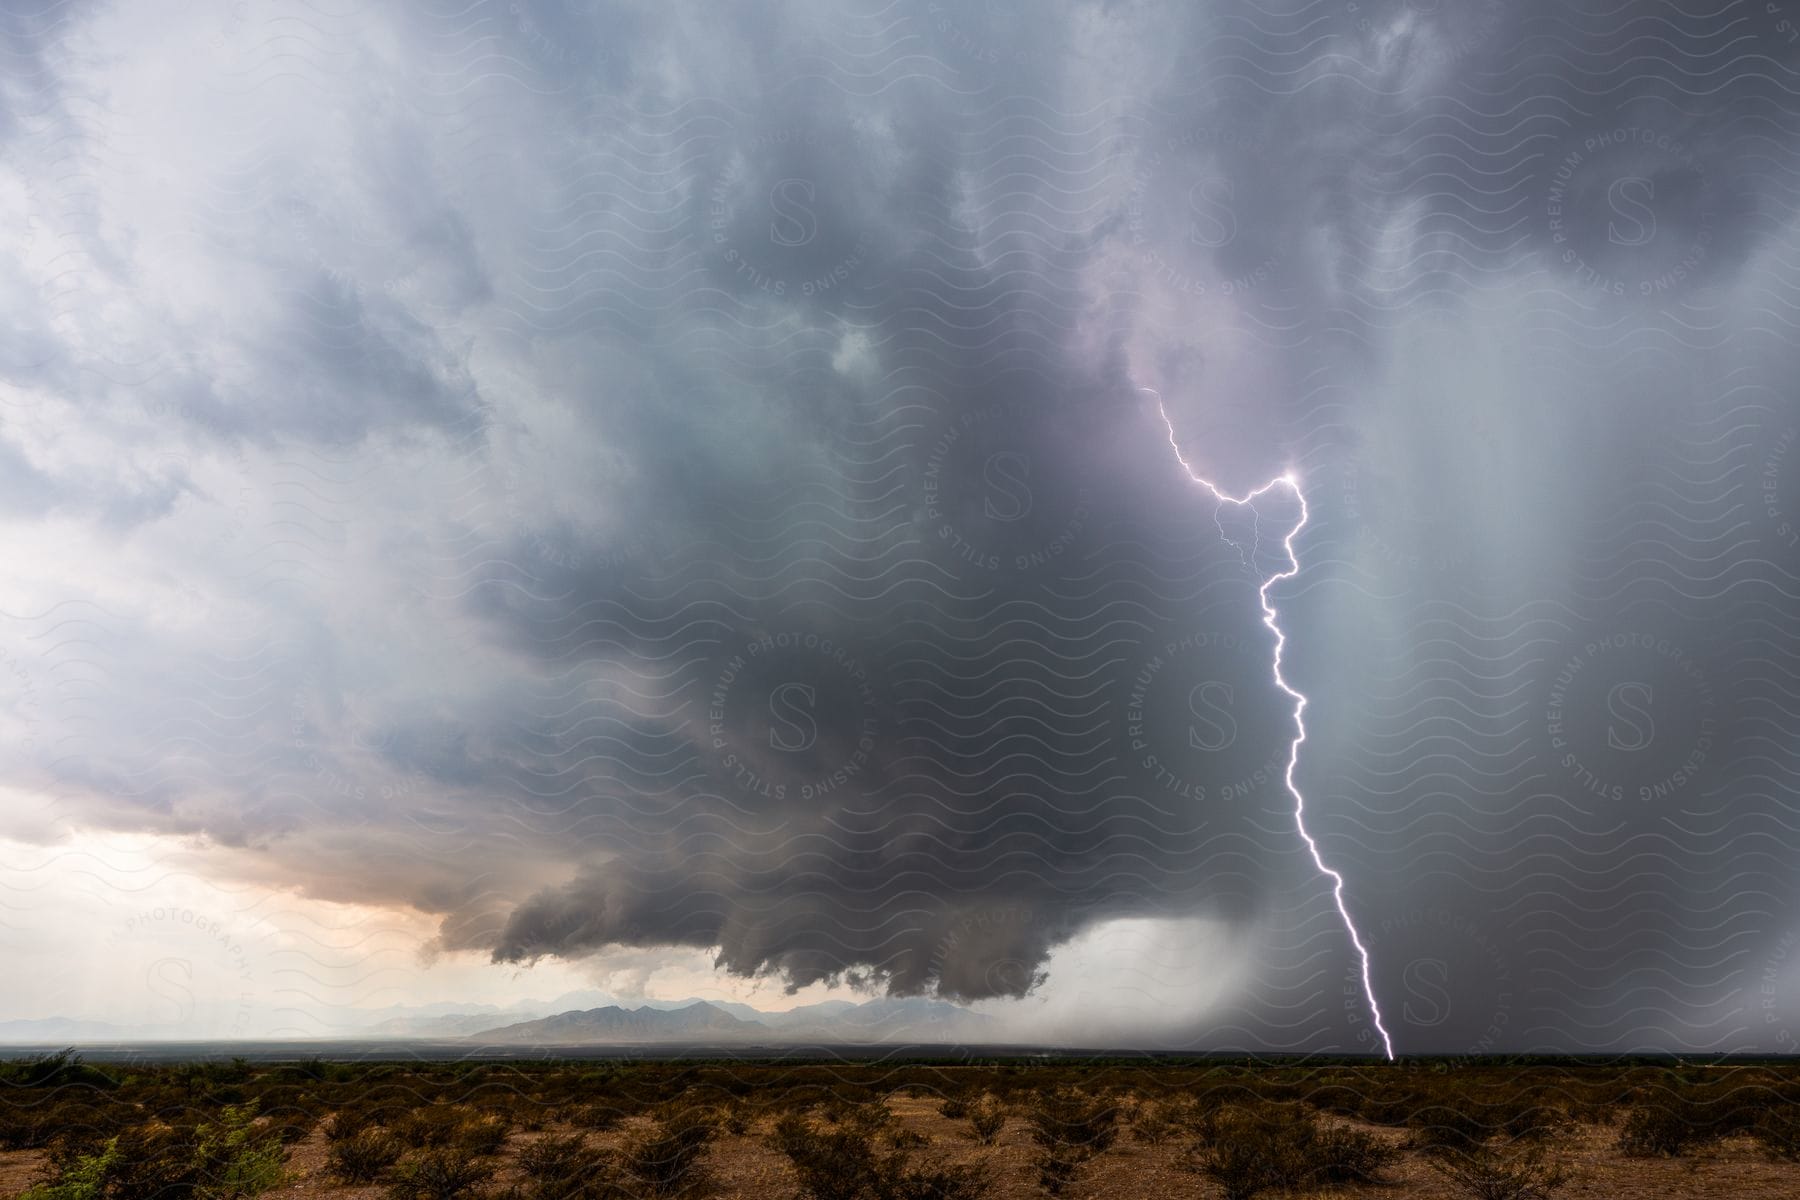 A bright lightning bolt strikes the desert ground from the stormy sky in arizona